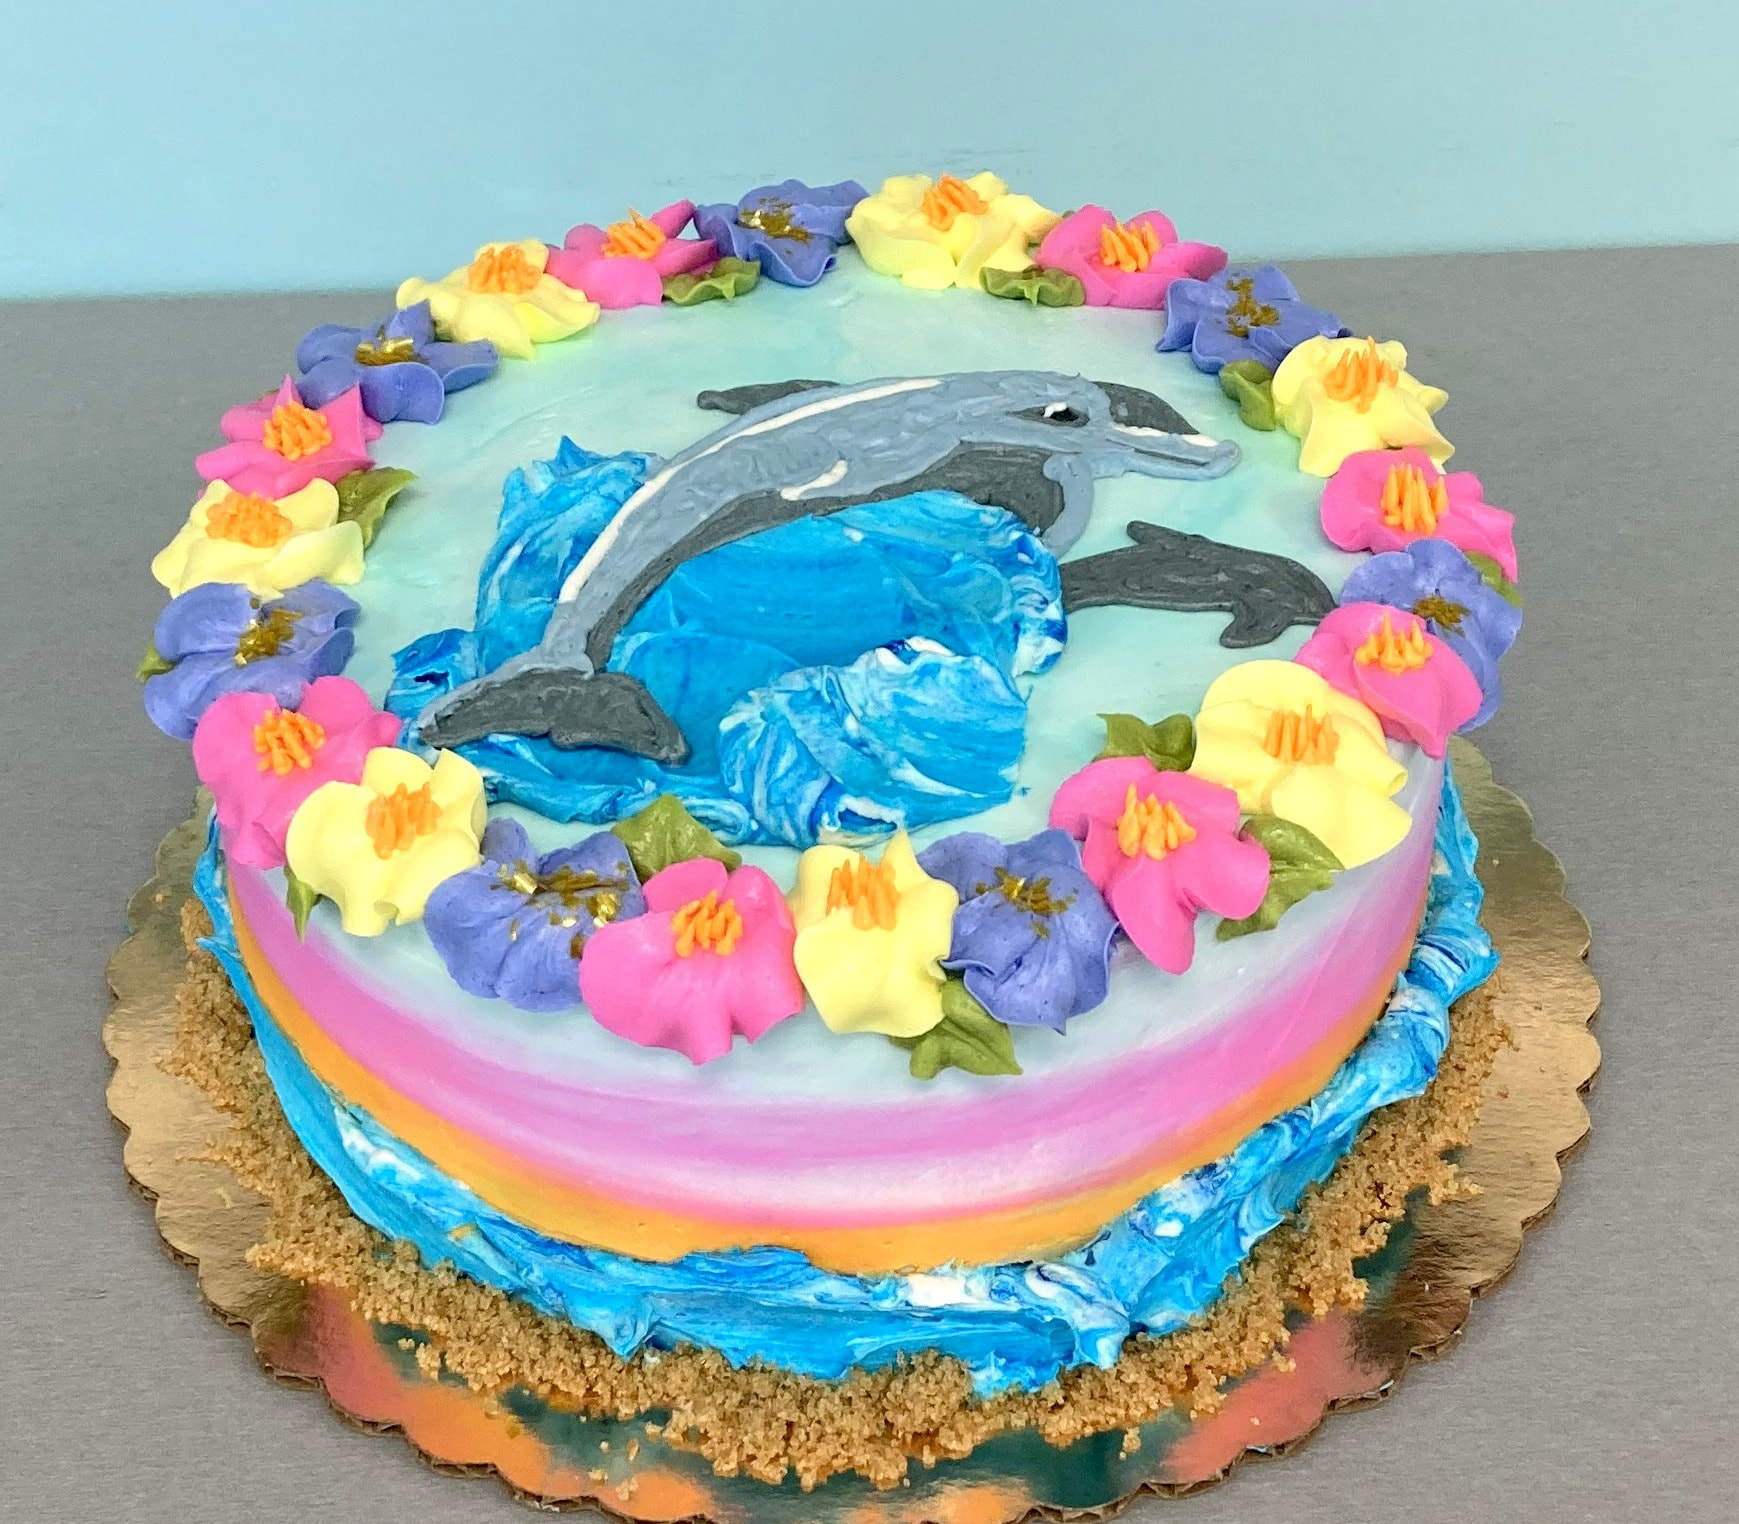 Cute Dolphin Cake Topper - Decorated Cake by Crumb Avenue - CakesDecor